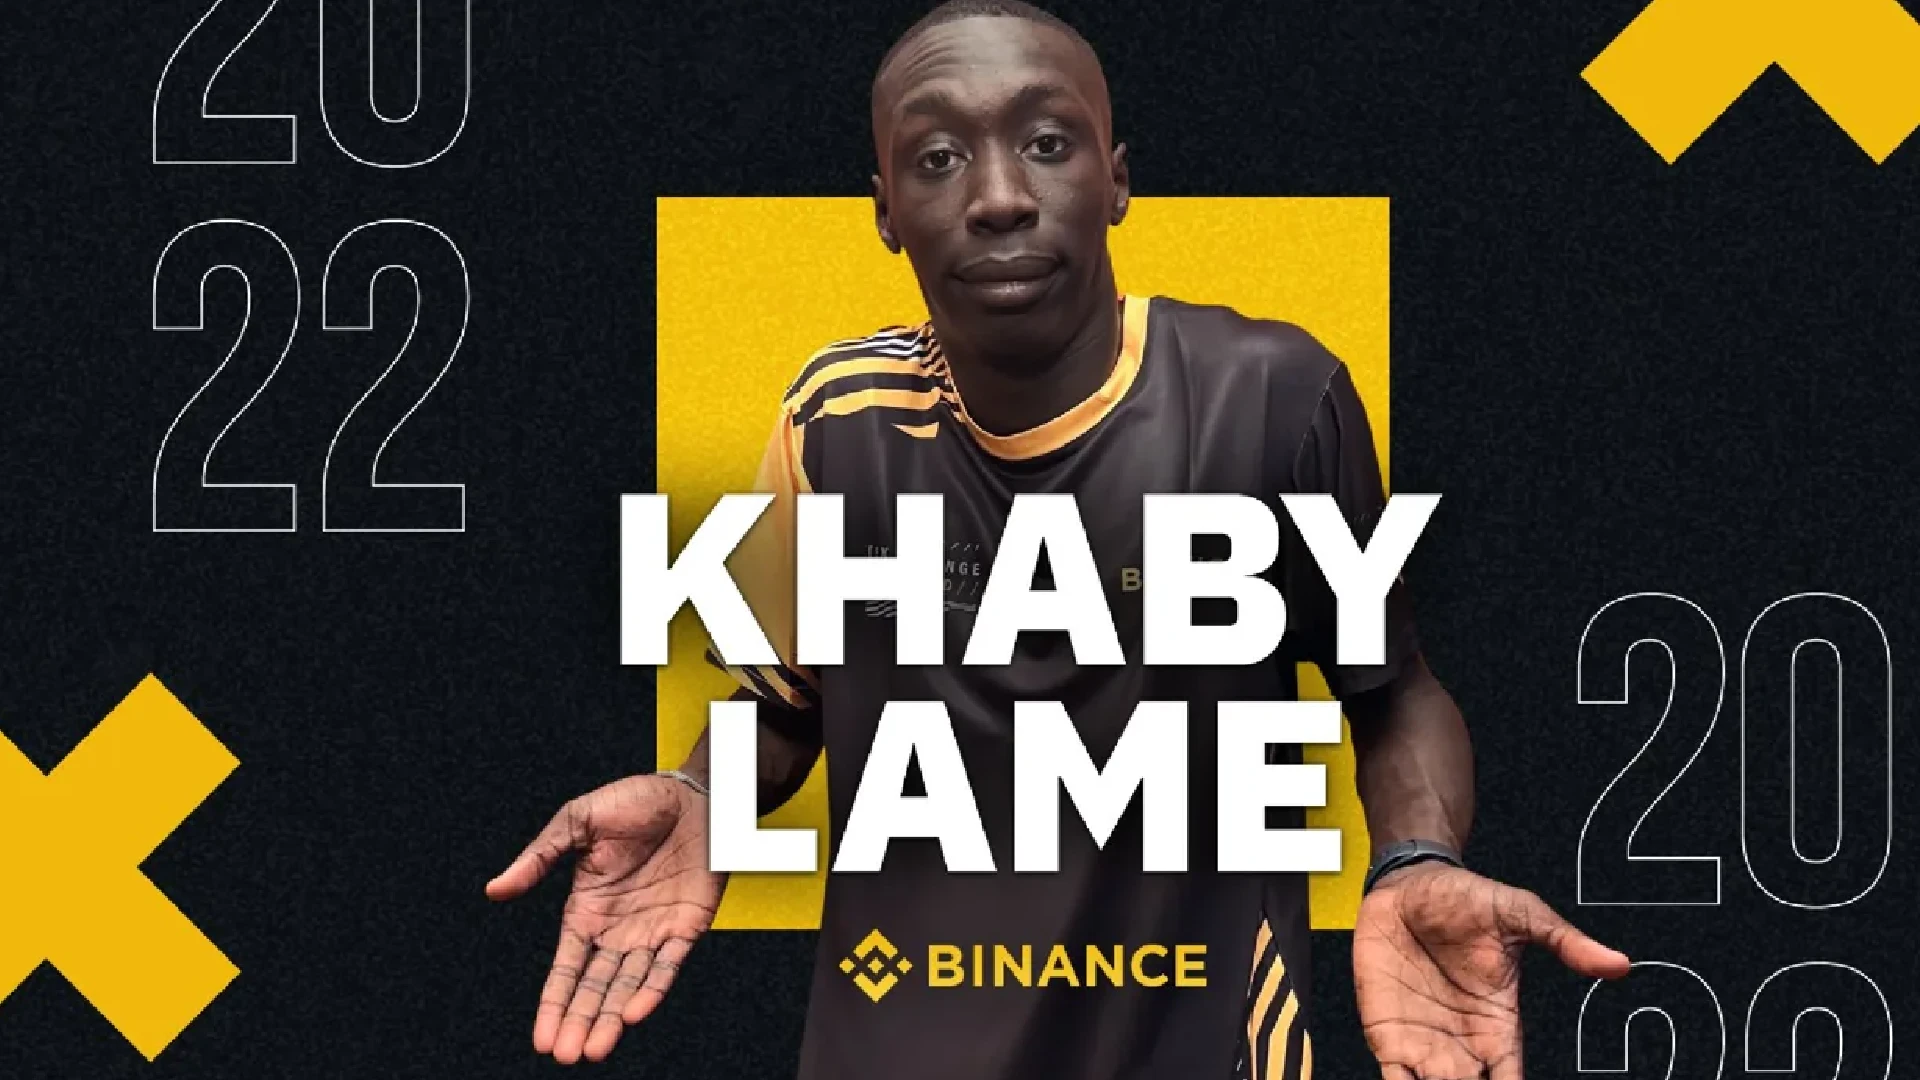 World’s Largest Crypto Exchange Binance Signs Up TikToker Khaby Lame As Brand Ambassador For Web3.0